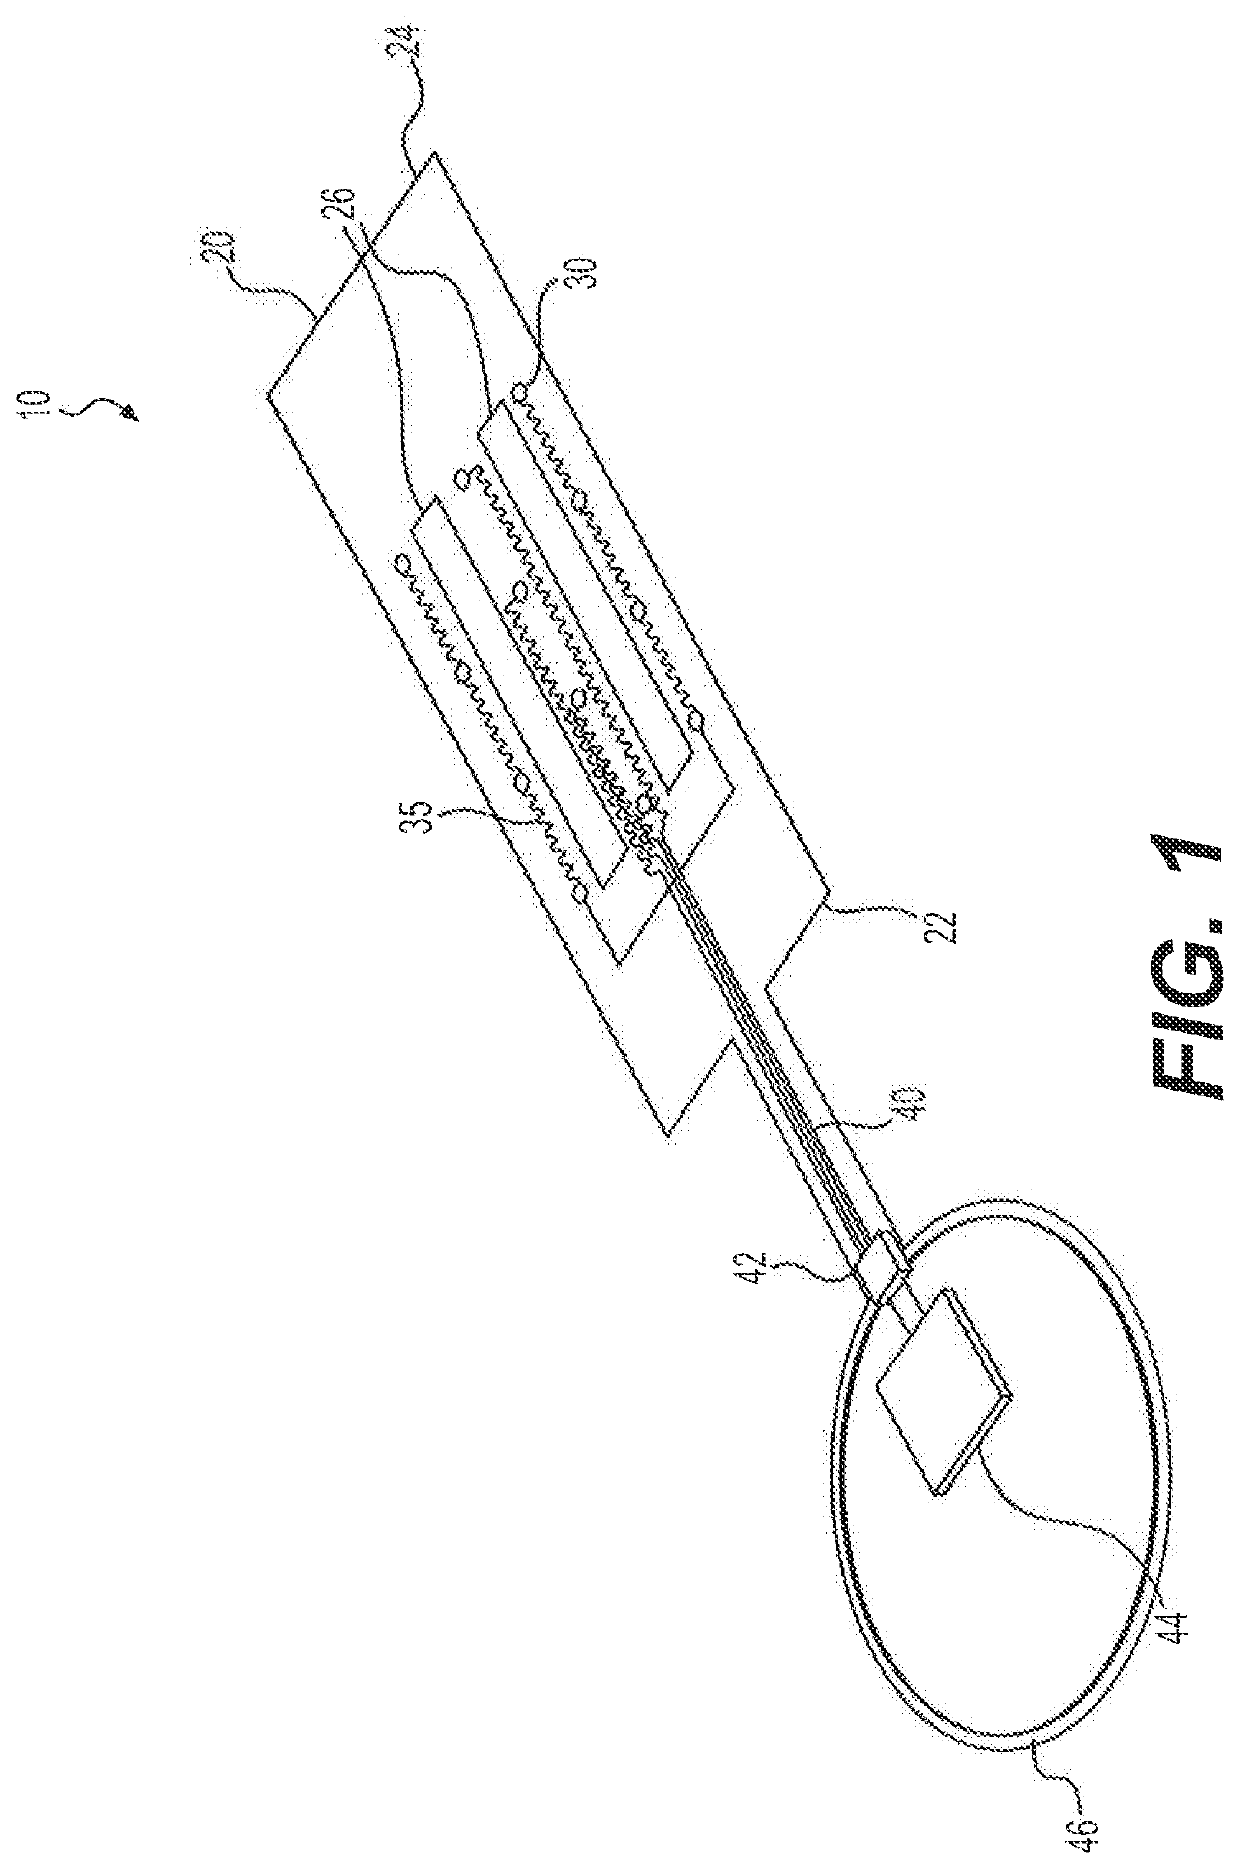 Extraneural cuff with flexible interconnects for stimulation and recording